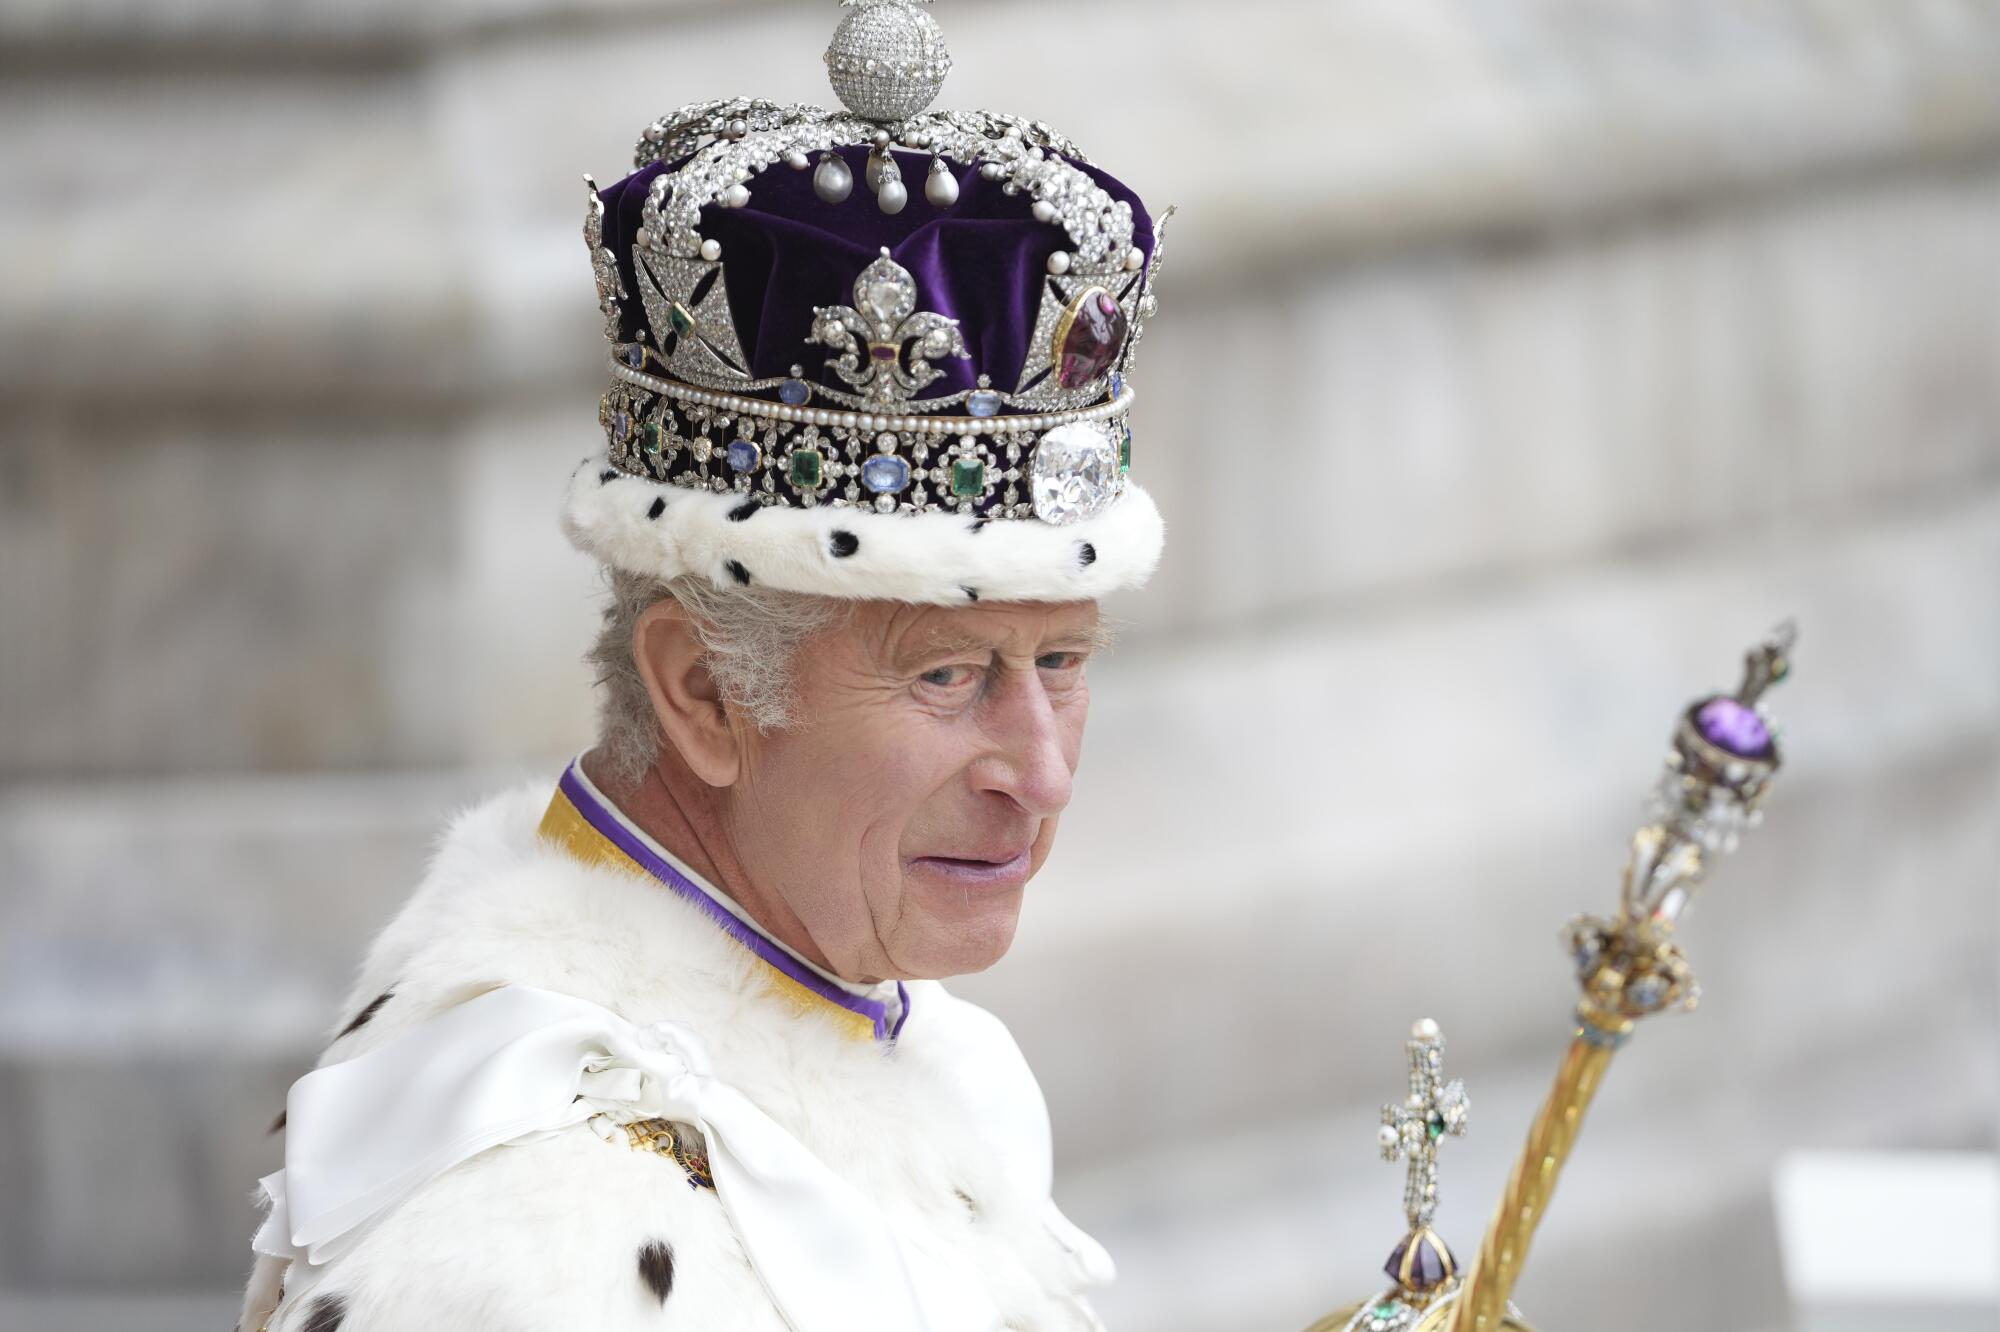 The King leaves Westminster Abbey after the coronation of King Charles III in London.